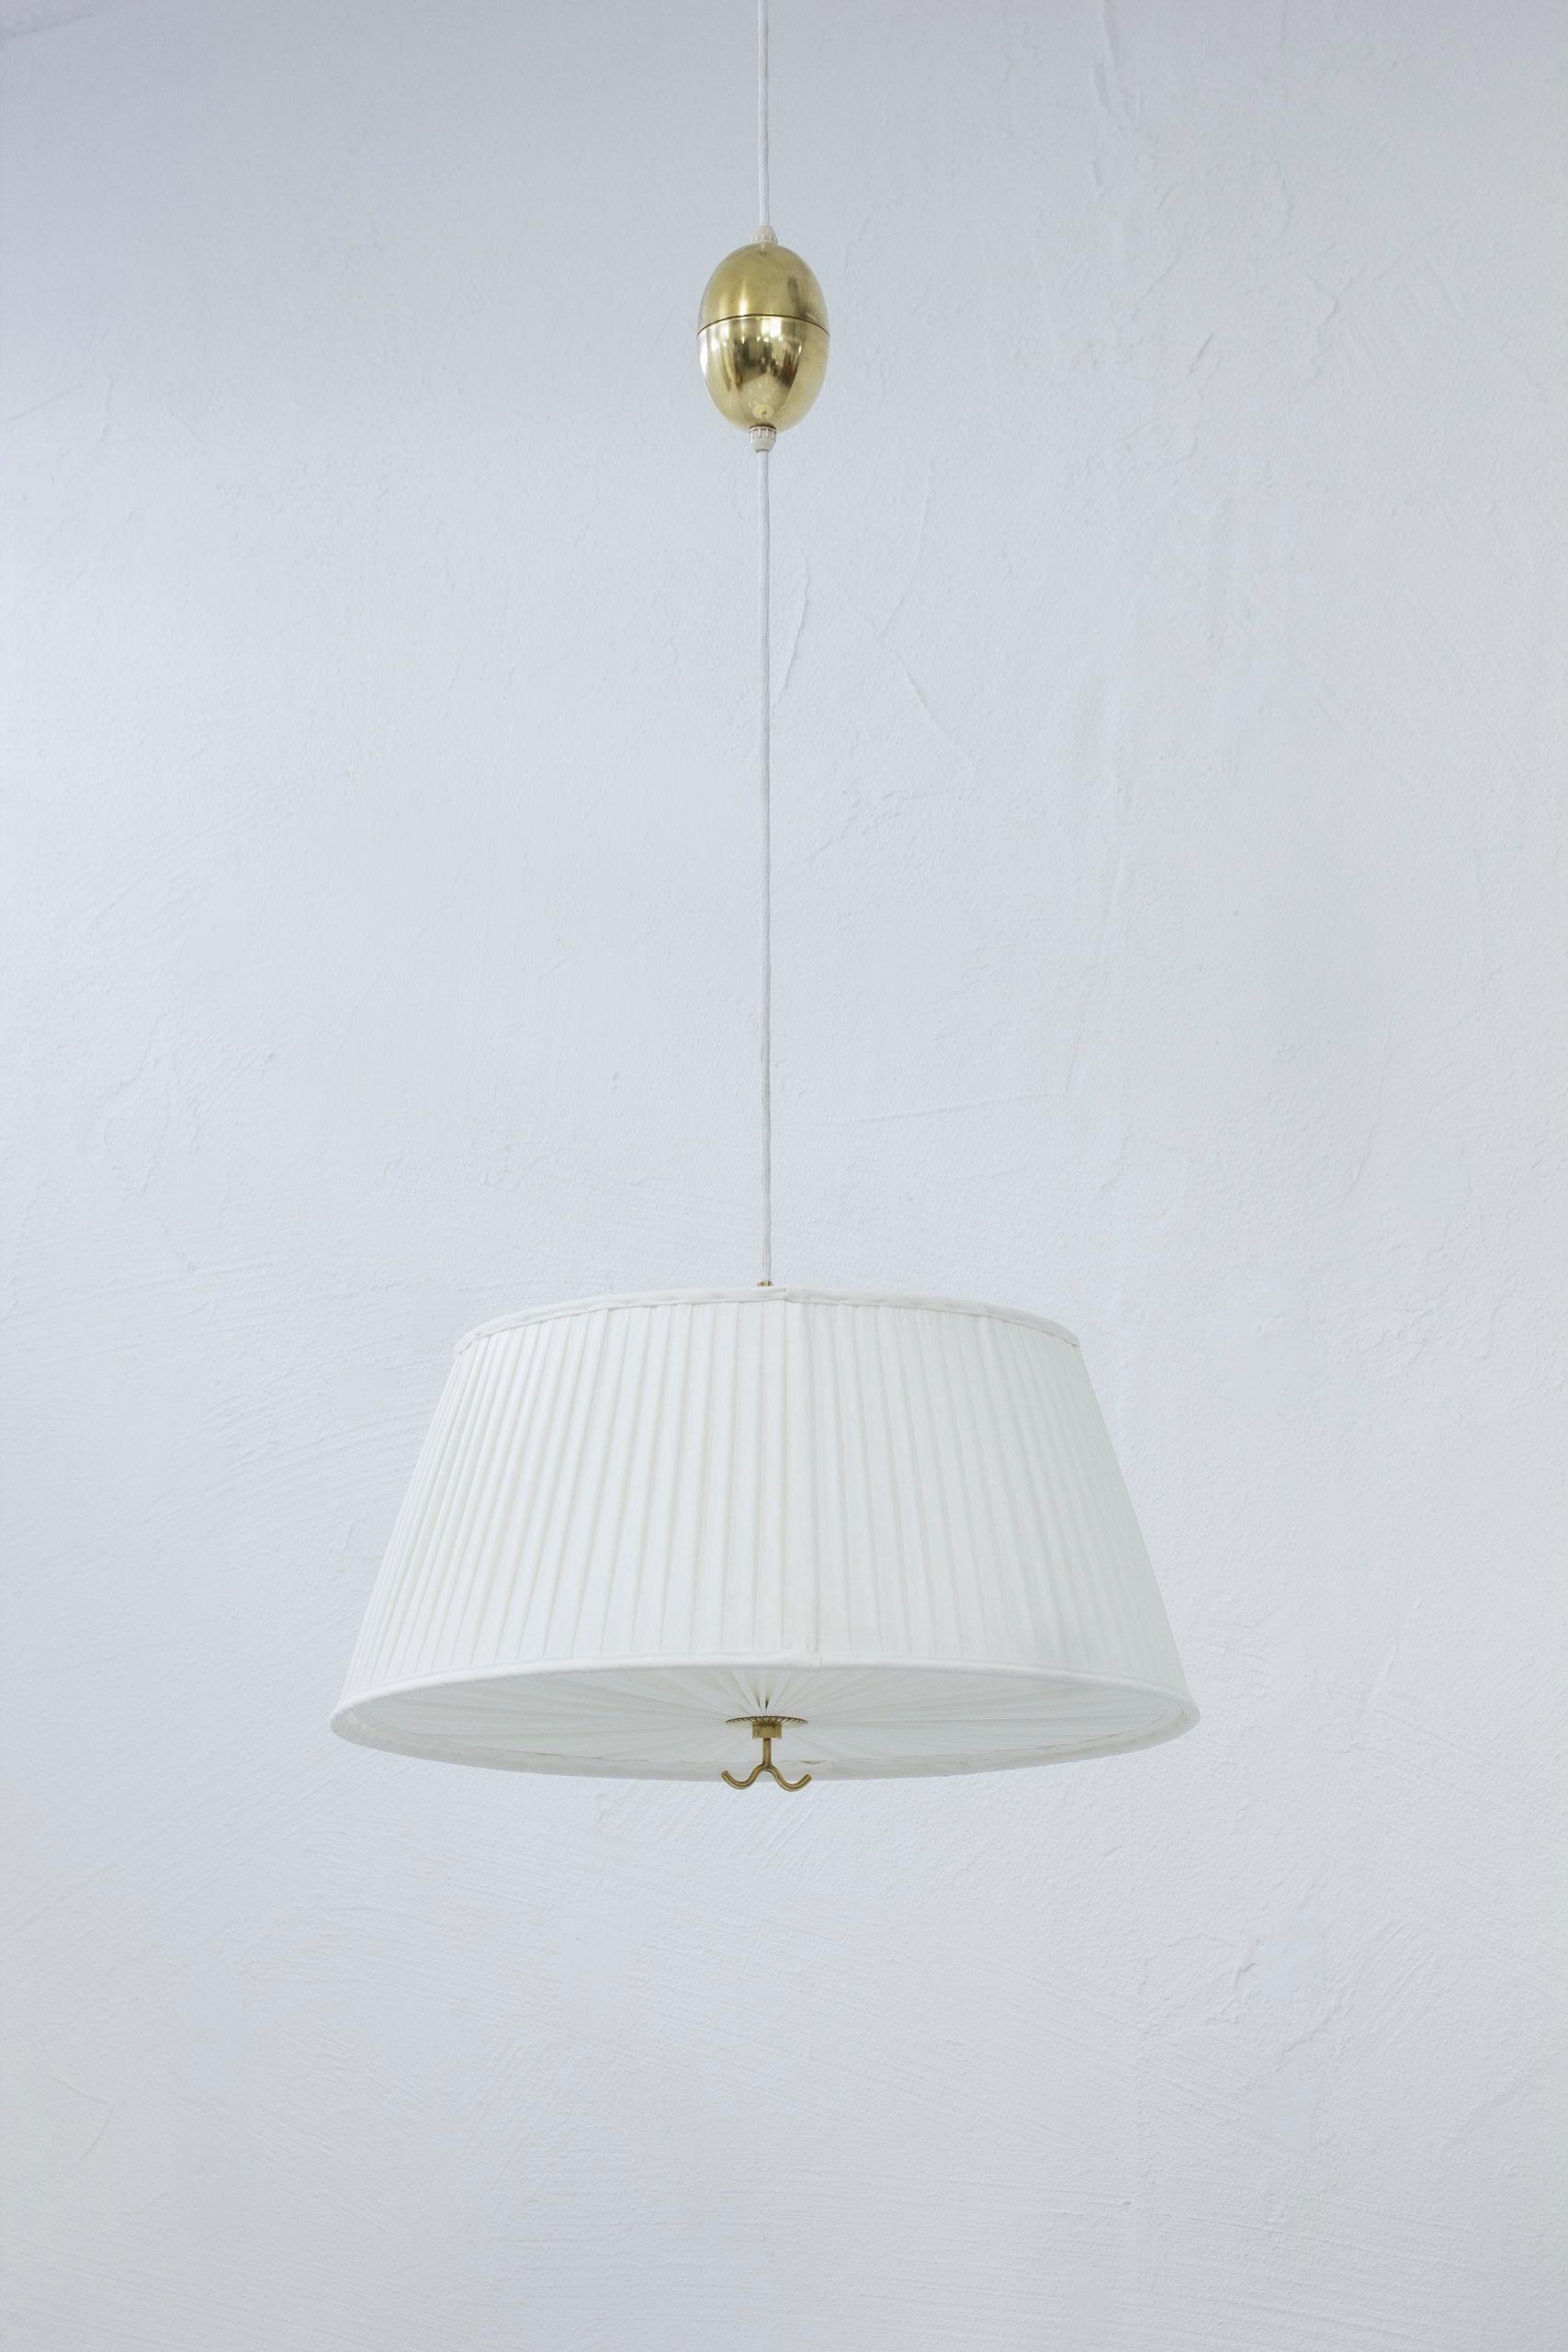 Scandinavian Modern Brass and Pleated Fabric Ceiling Lamp 11558 by Harald Notini, Böhlmarks, Sweden